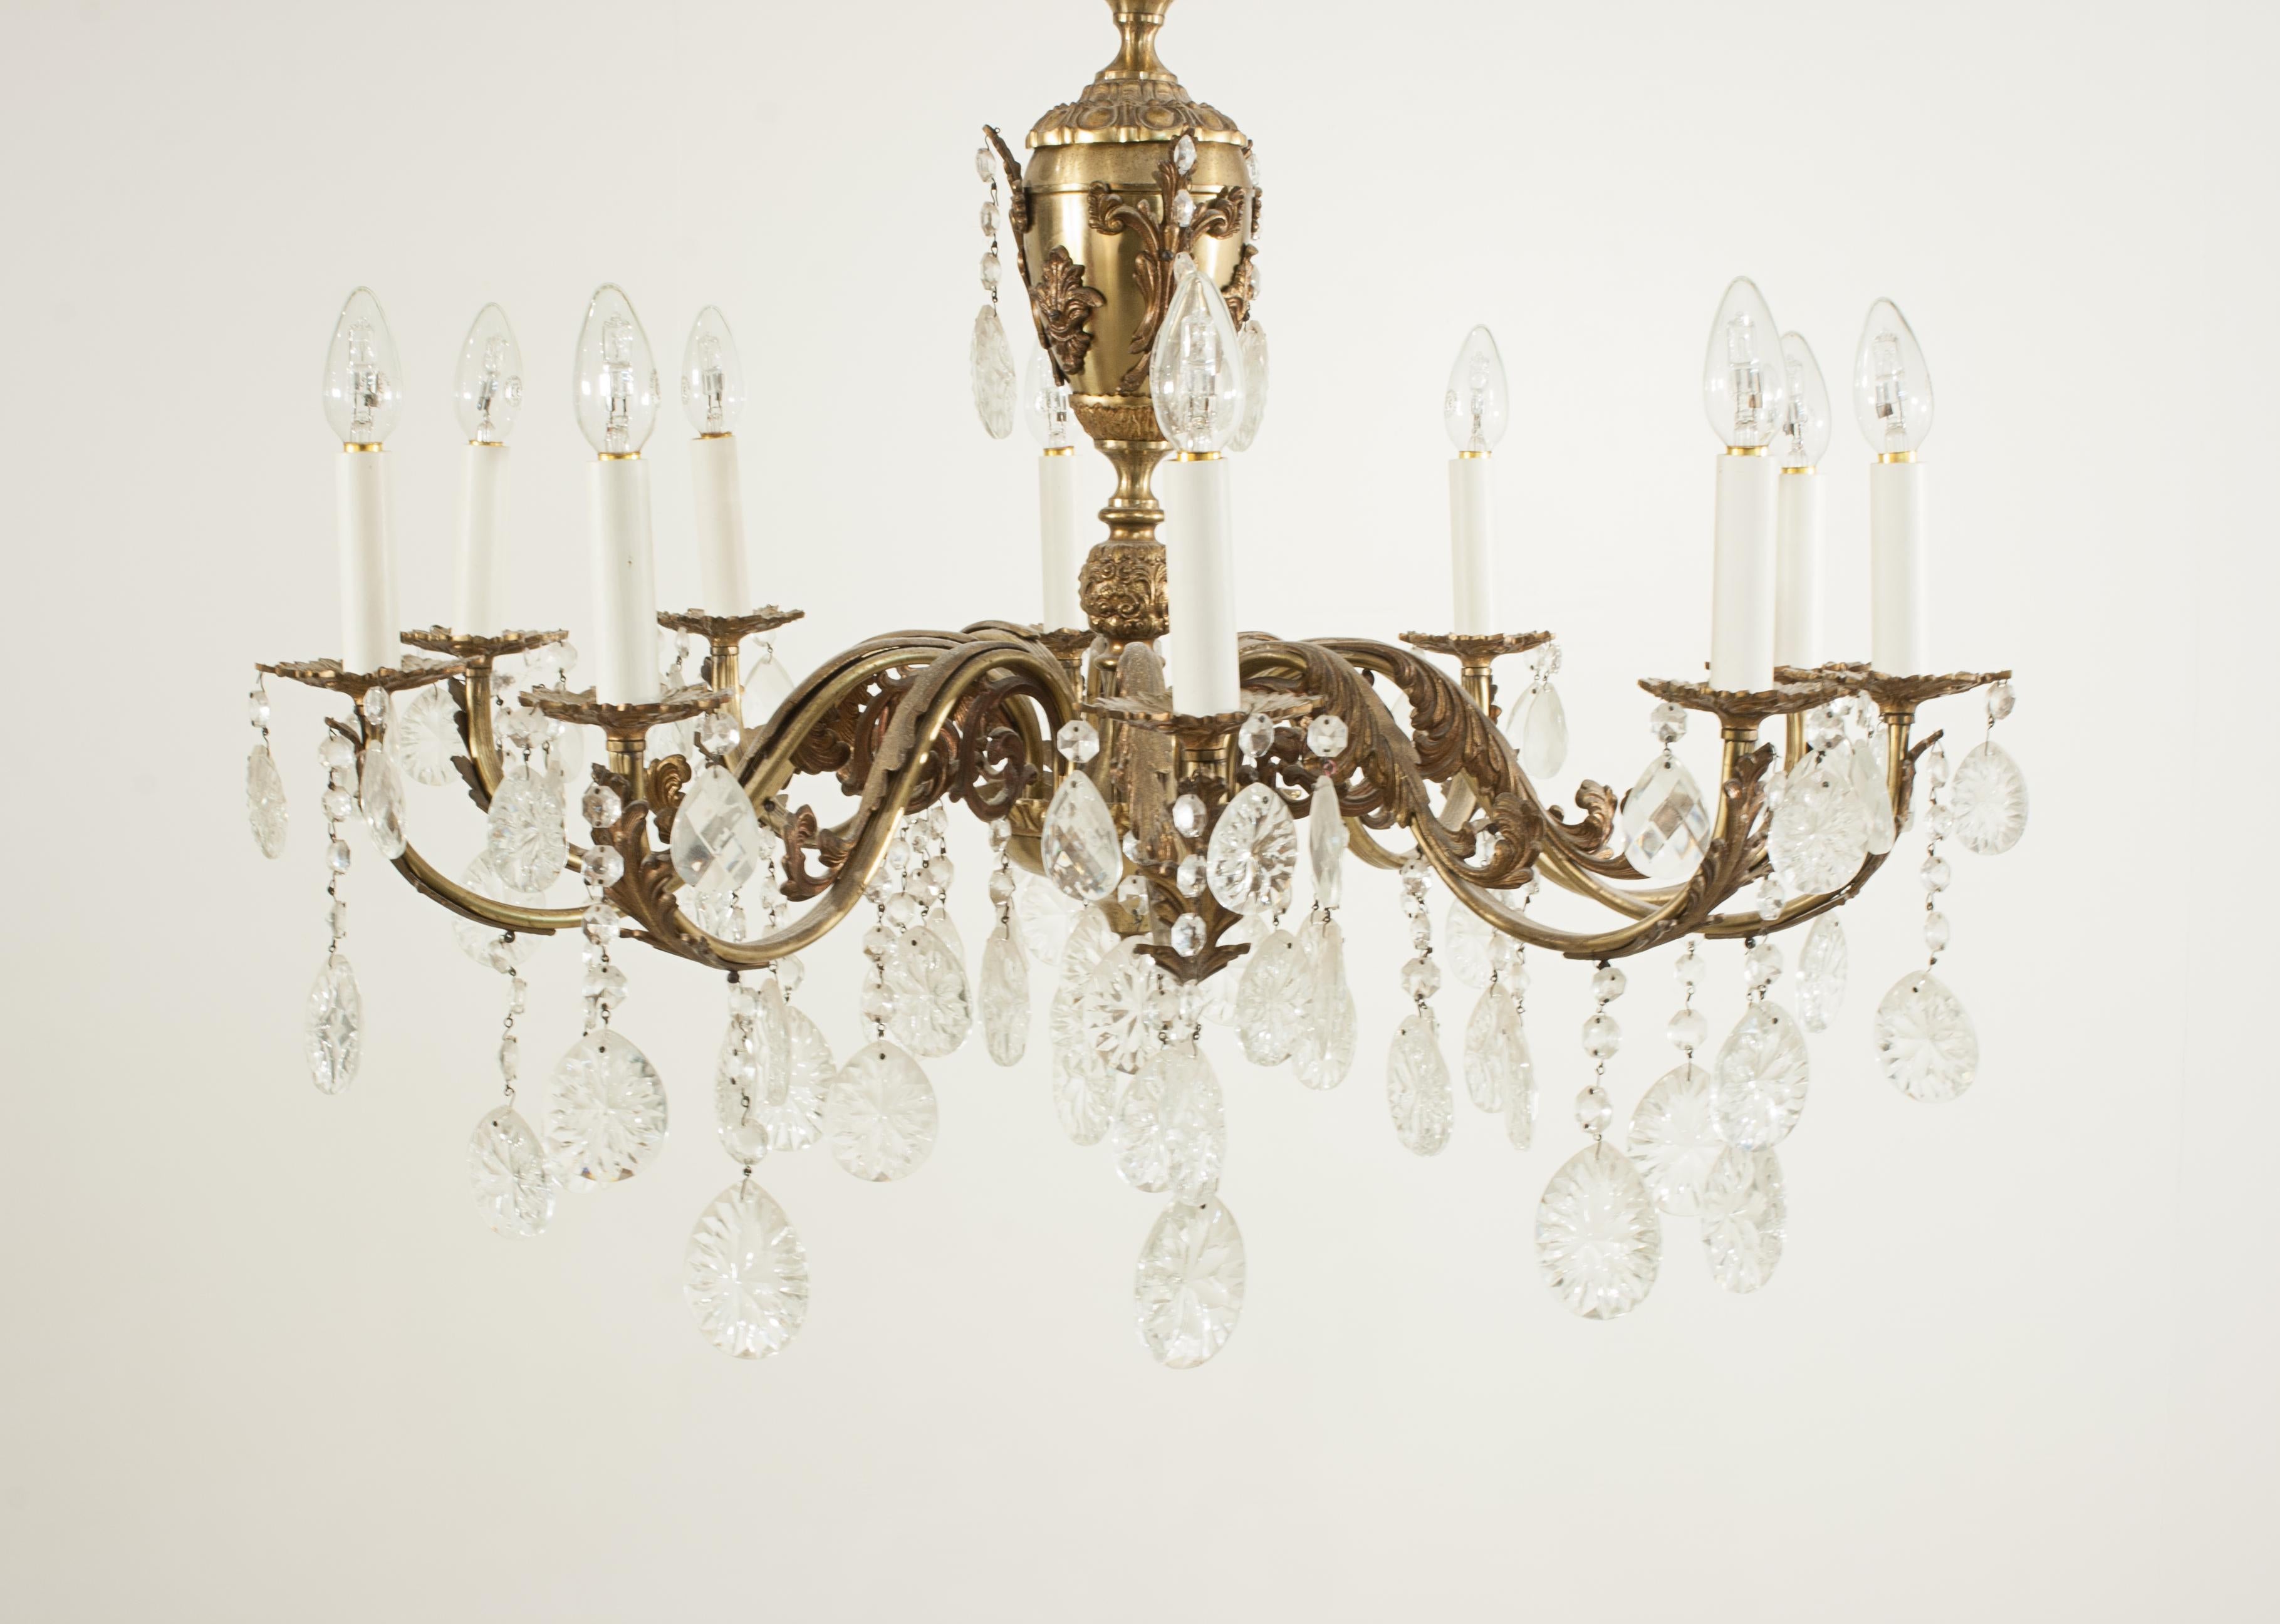 Antique Gilded Crystal Chandelier.
An elegant and beautiful gilt chandelier with intricate foliated detailing and crystal pendants. The chandelier constructed with a main bulbous central body with ten delicate acanthus leaf clad scrolling arms. Each